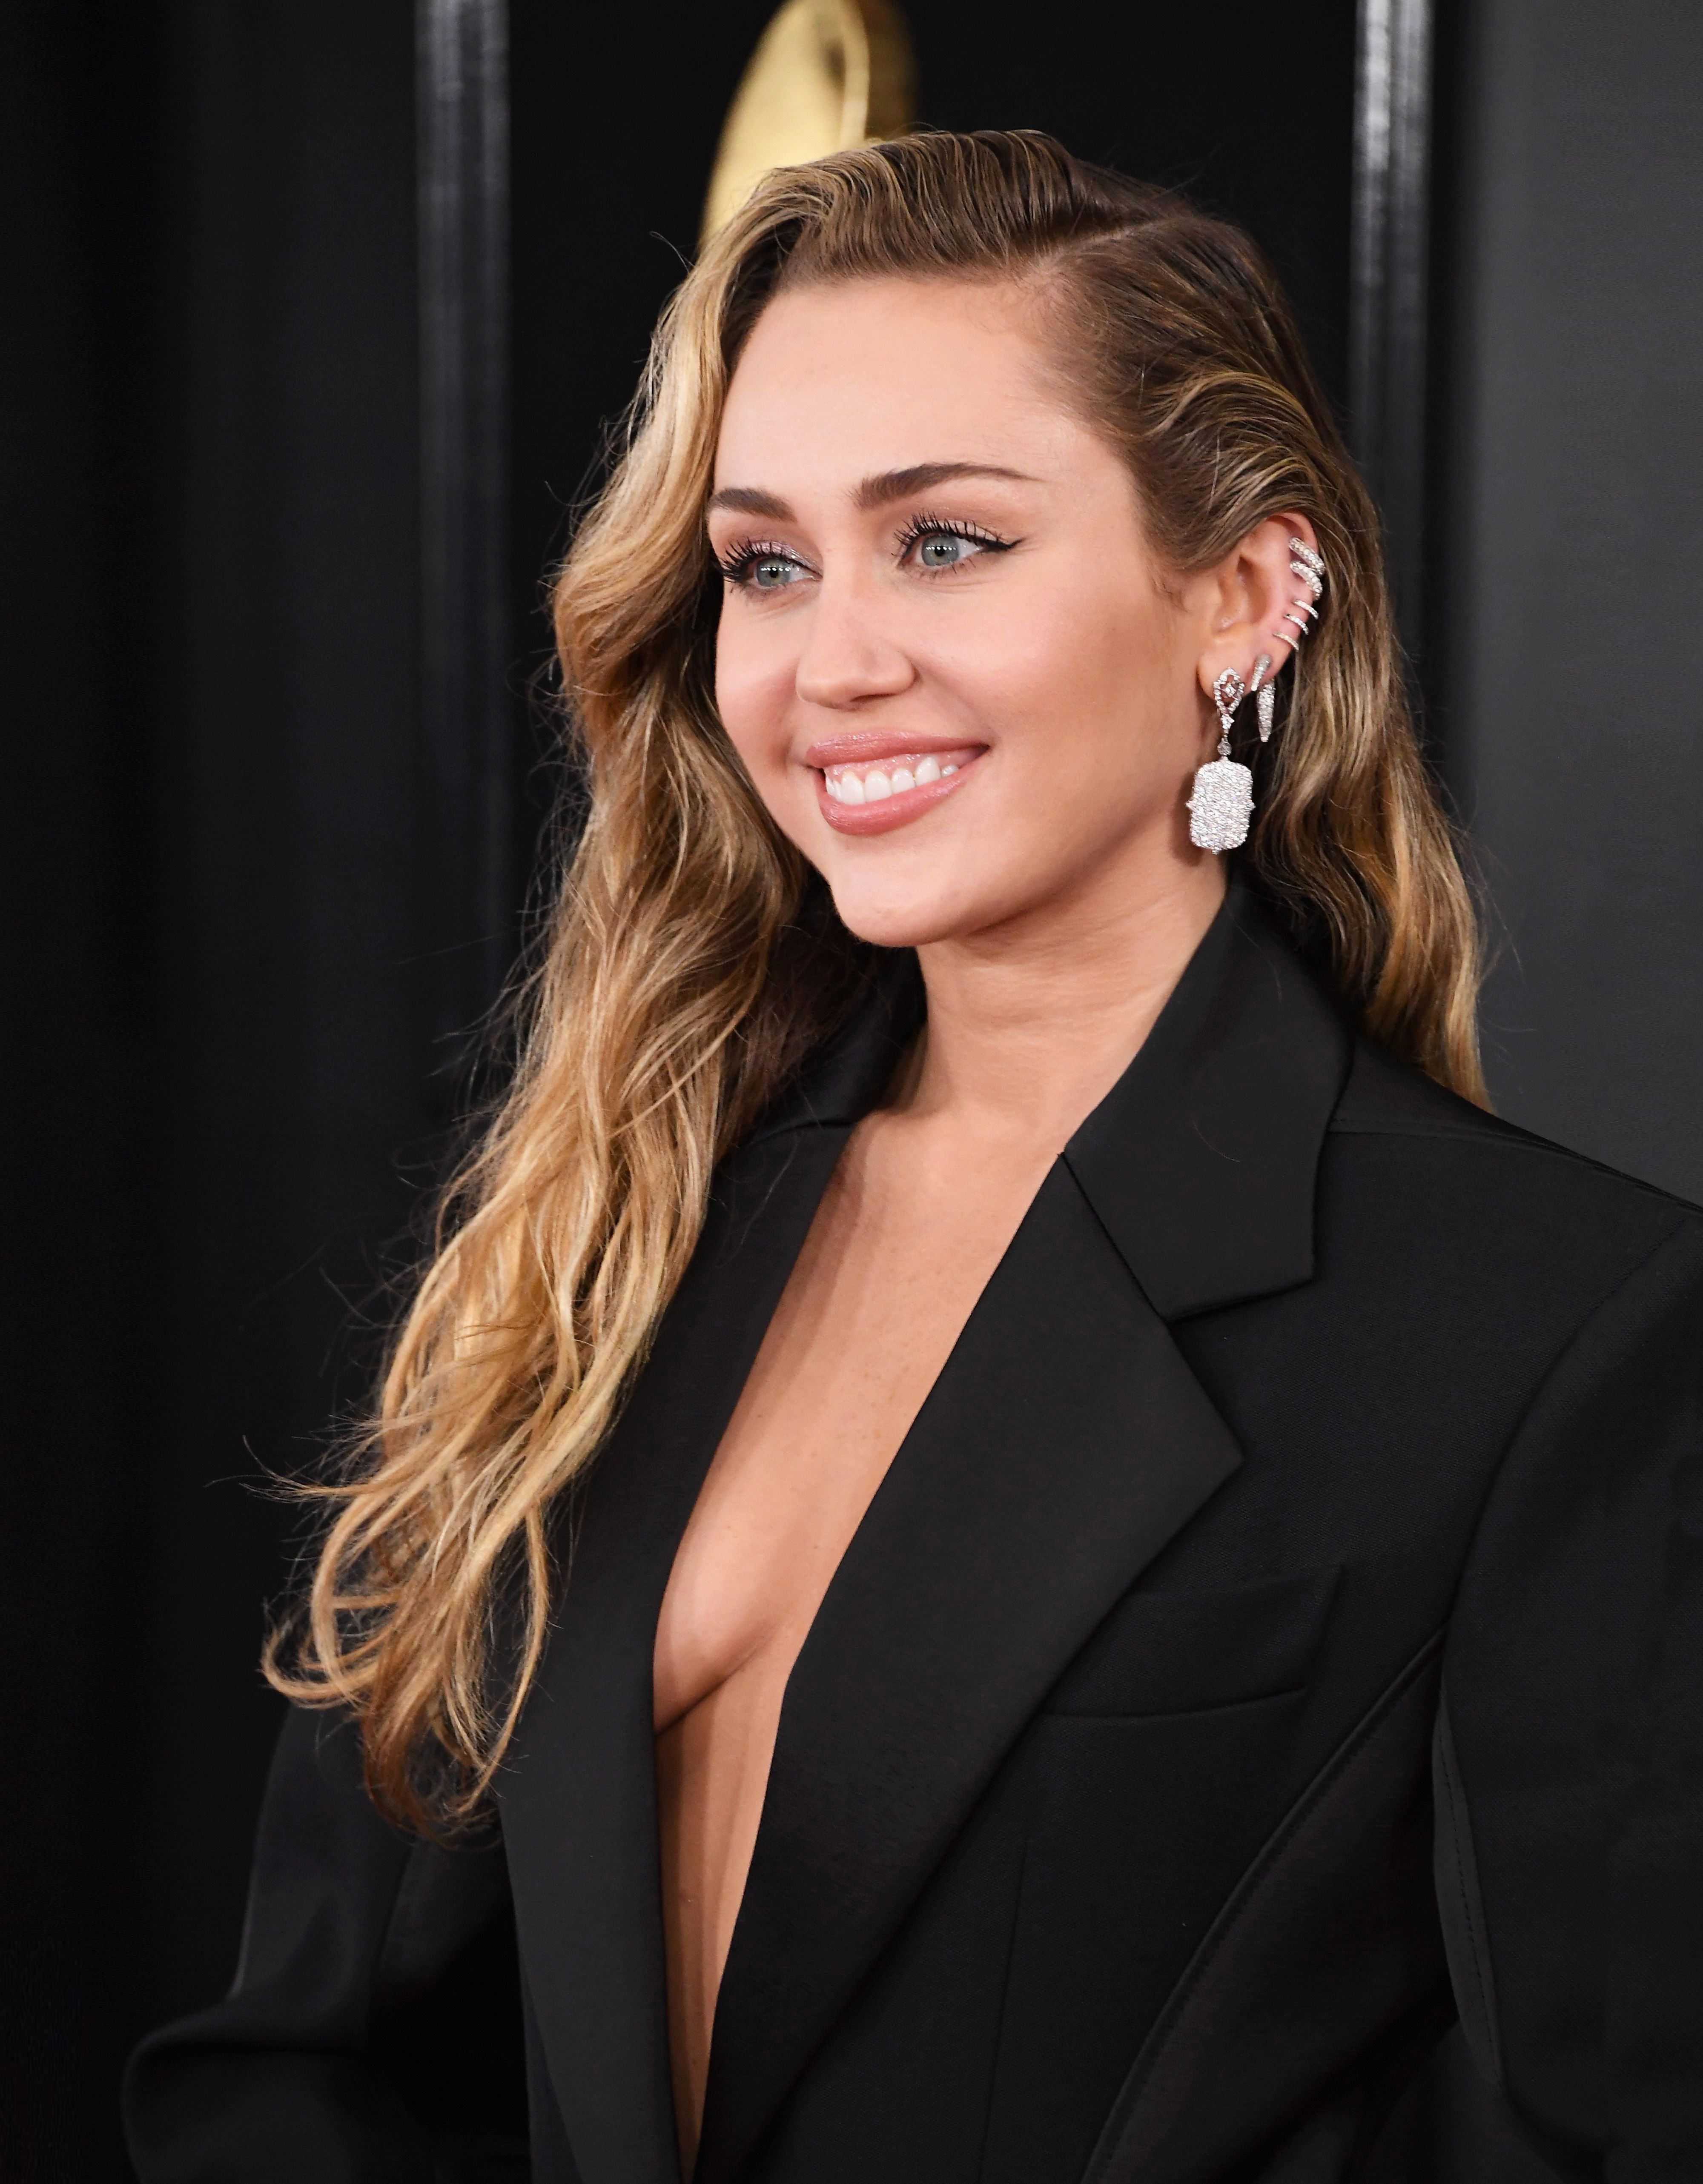 Miley Cyrus Hair Is Now Styled Into A Lob For The 2019 Met Gala